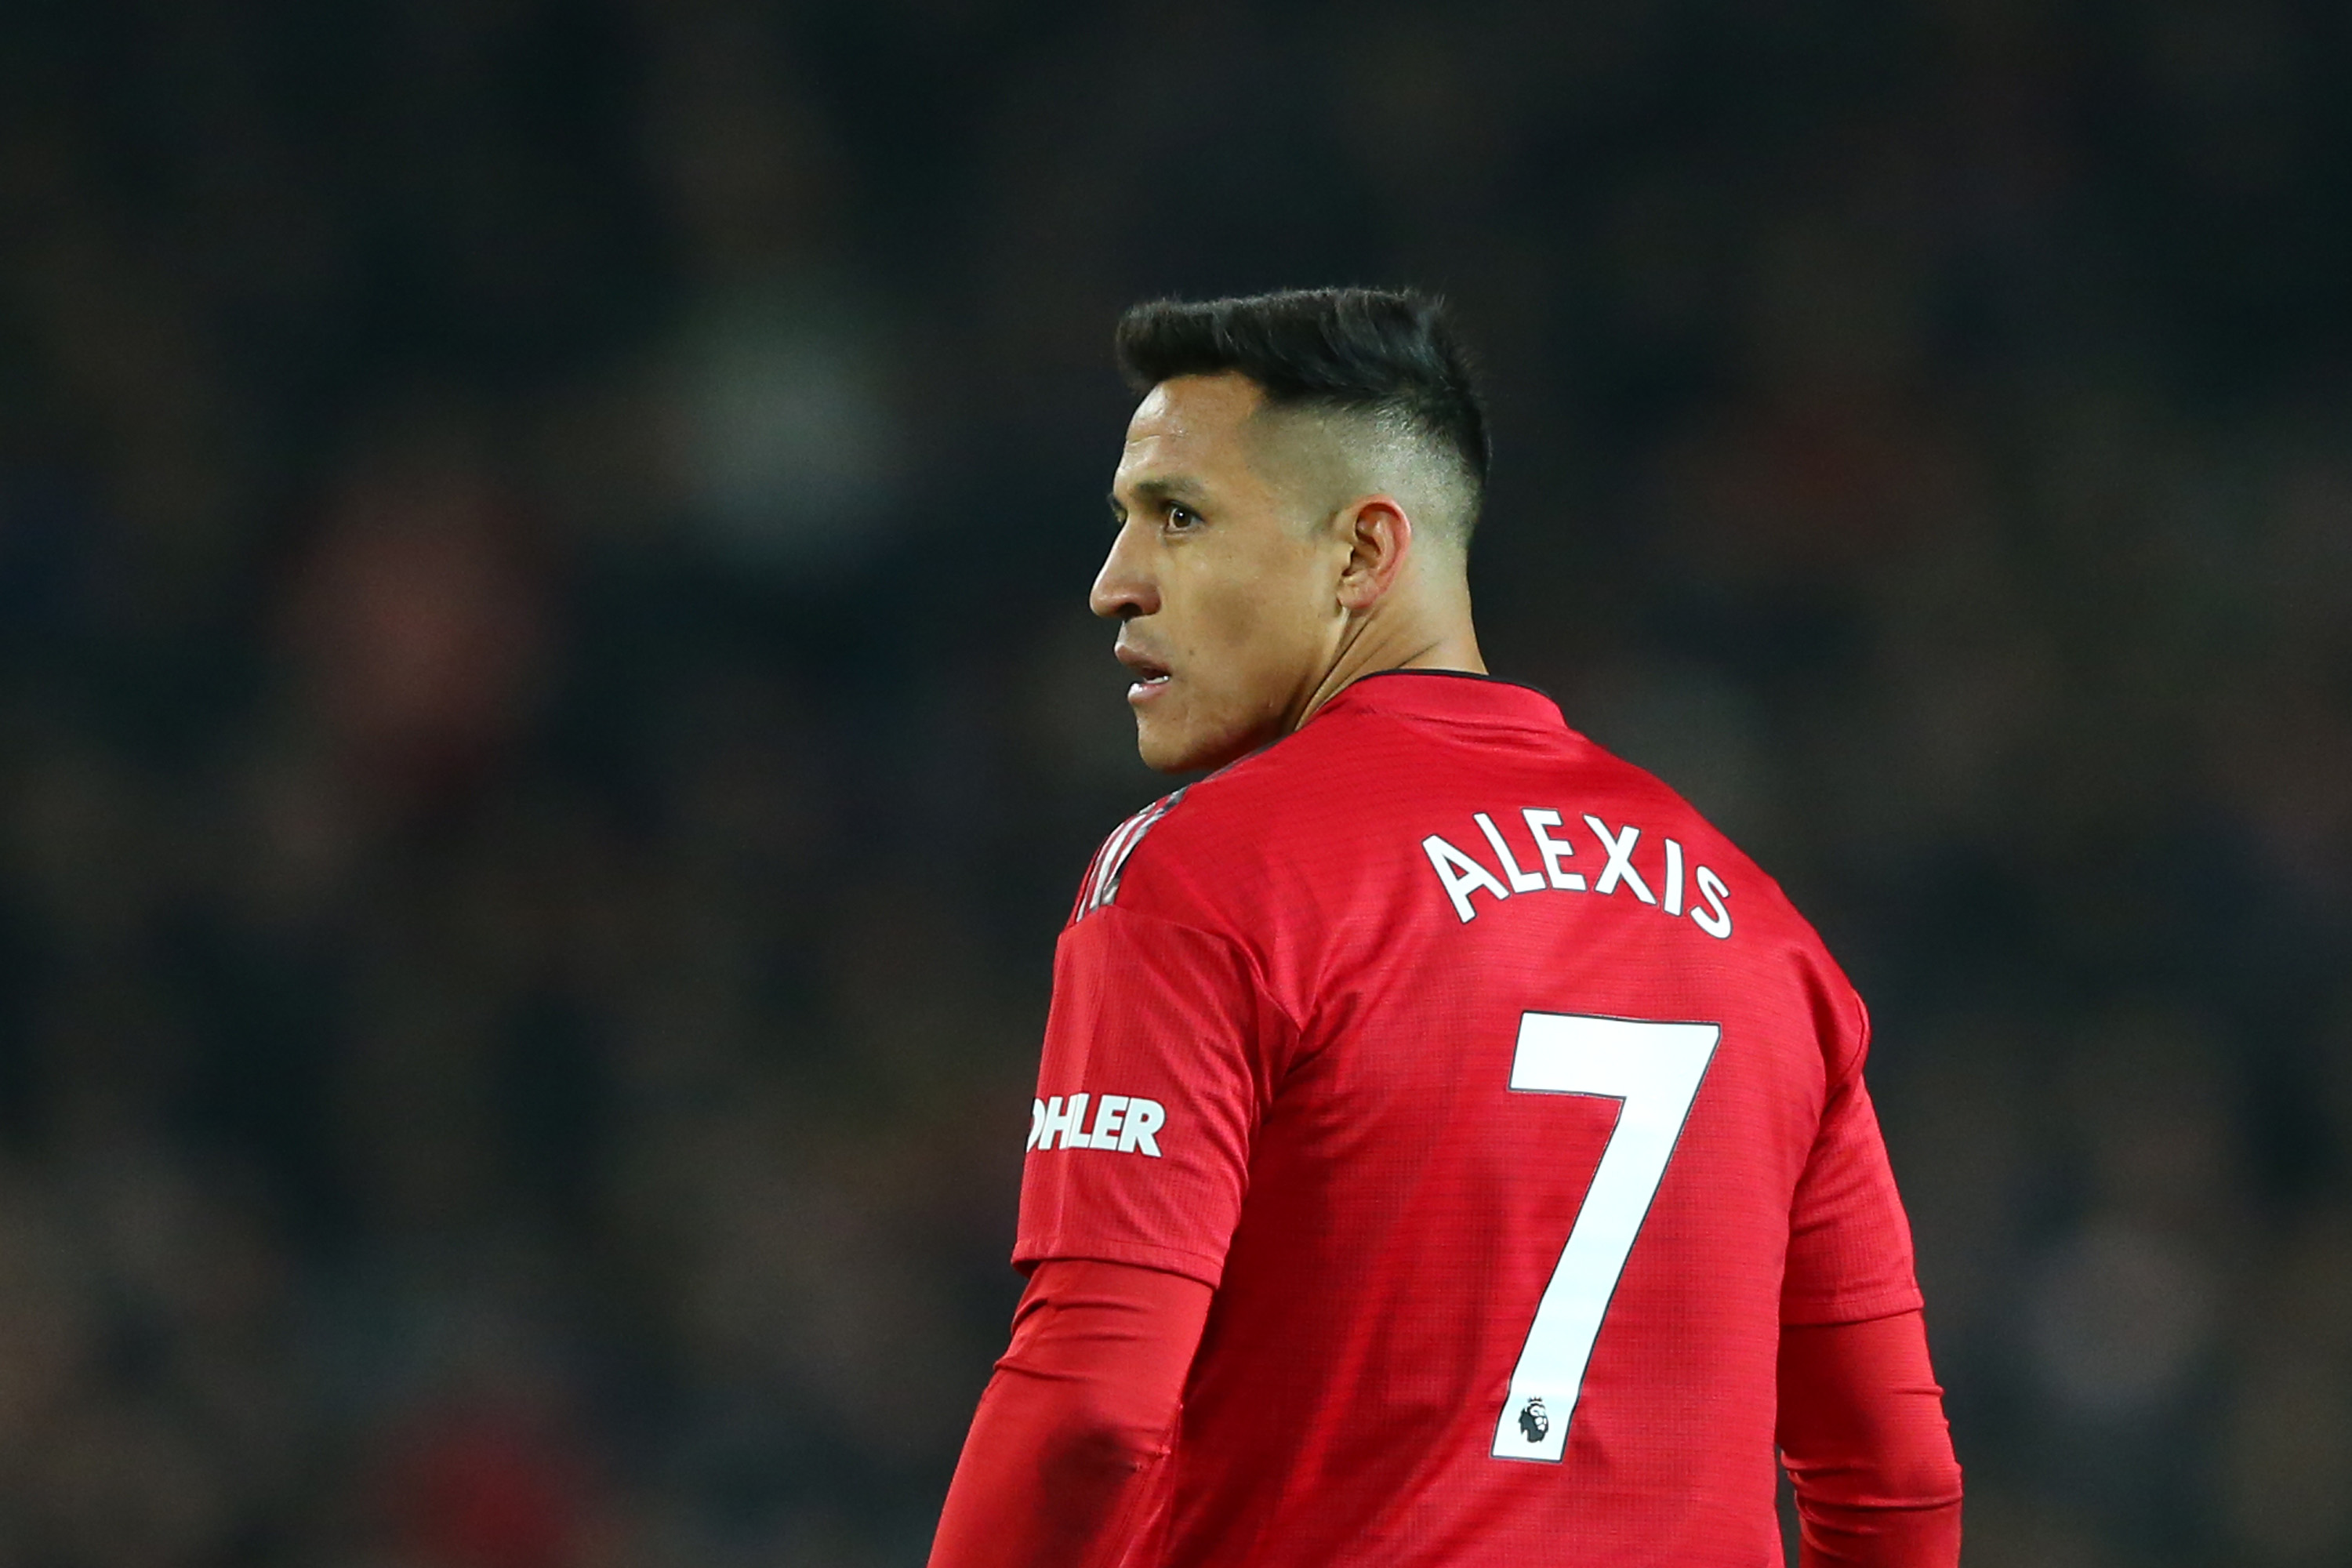 MANCHESTER, ENGLAND - NOVEMBER 24:  Alexis Sanchez of Manchester United looks on during the Premier League match between Manchester United and Crystal Palace at Old Trafford on November 24, 2018 in Manchester, United Kingdom.  (Photo by Alex Livesey/Getty Images)